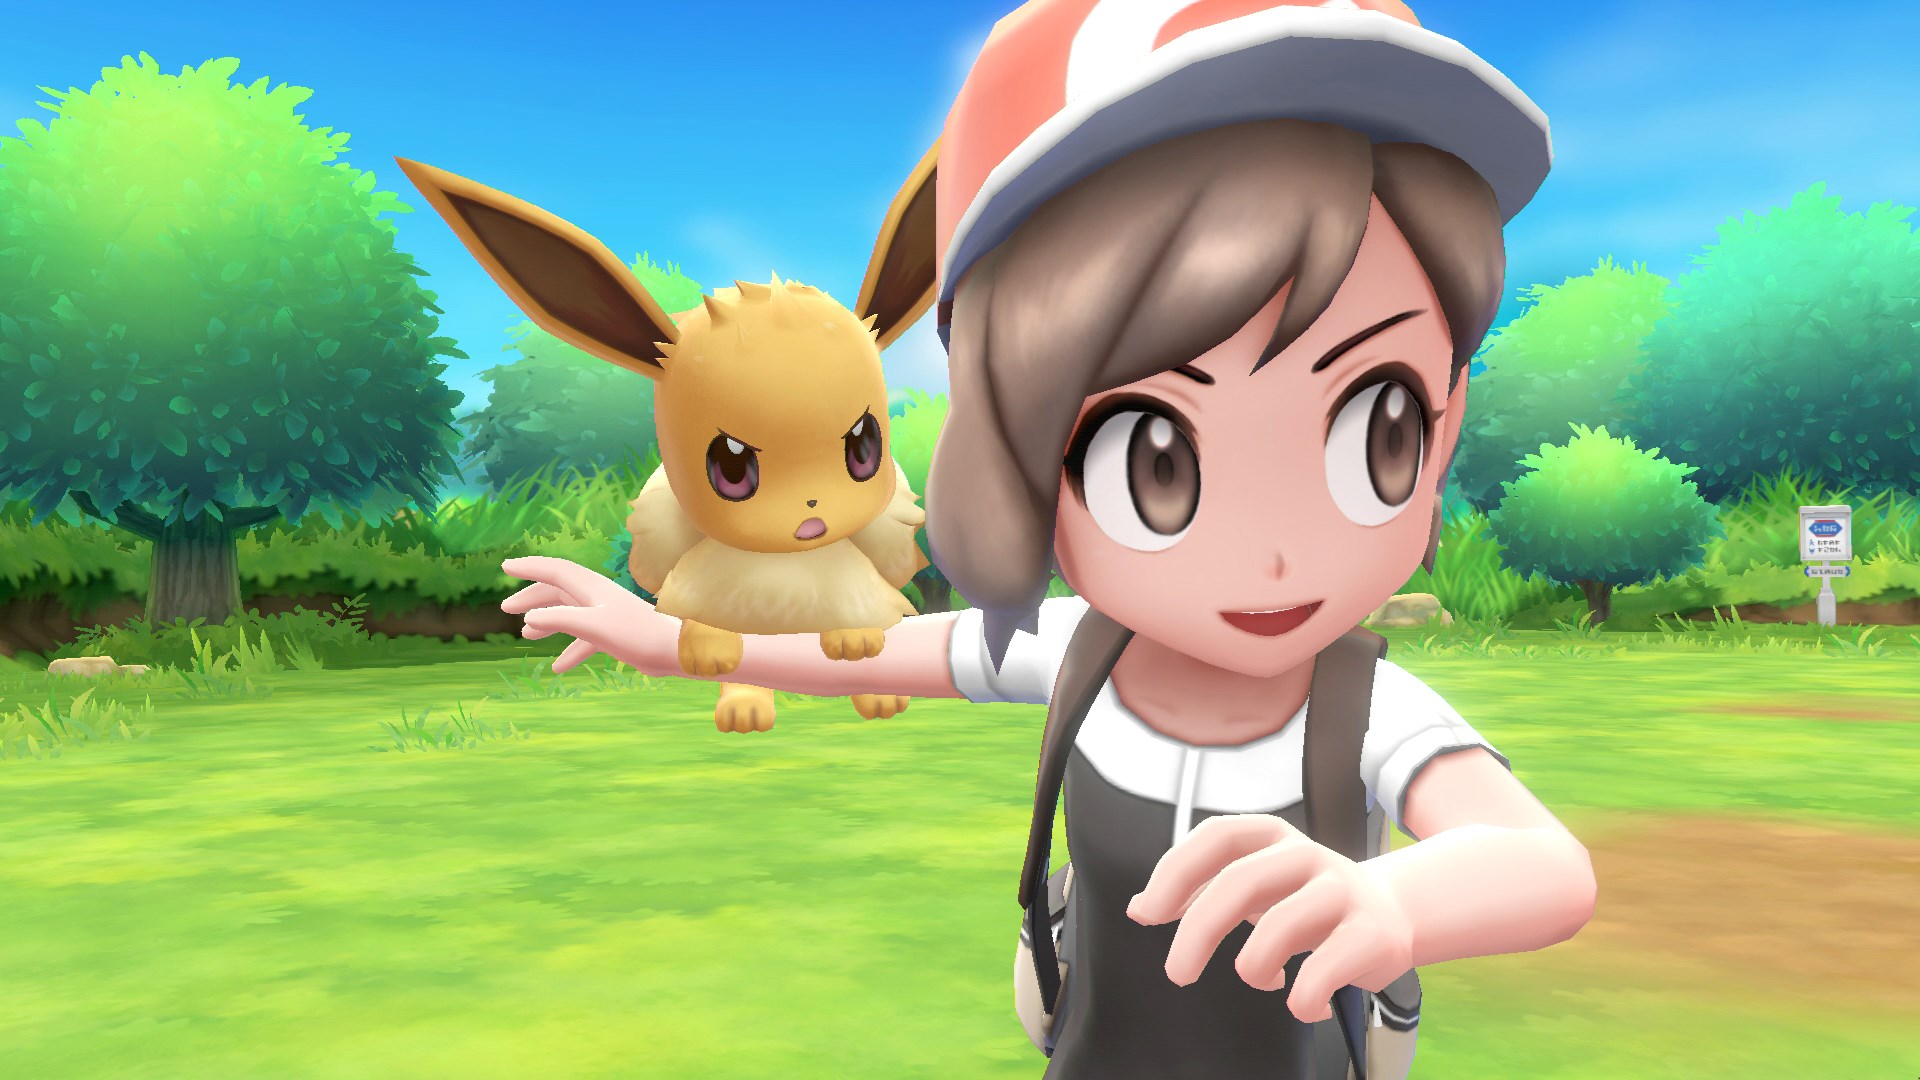 Nintendo Switch finally catches a Pokemon with Lets Go Pikachu! and Lets Go Eevee! on the way